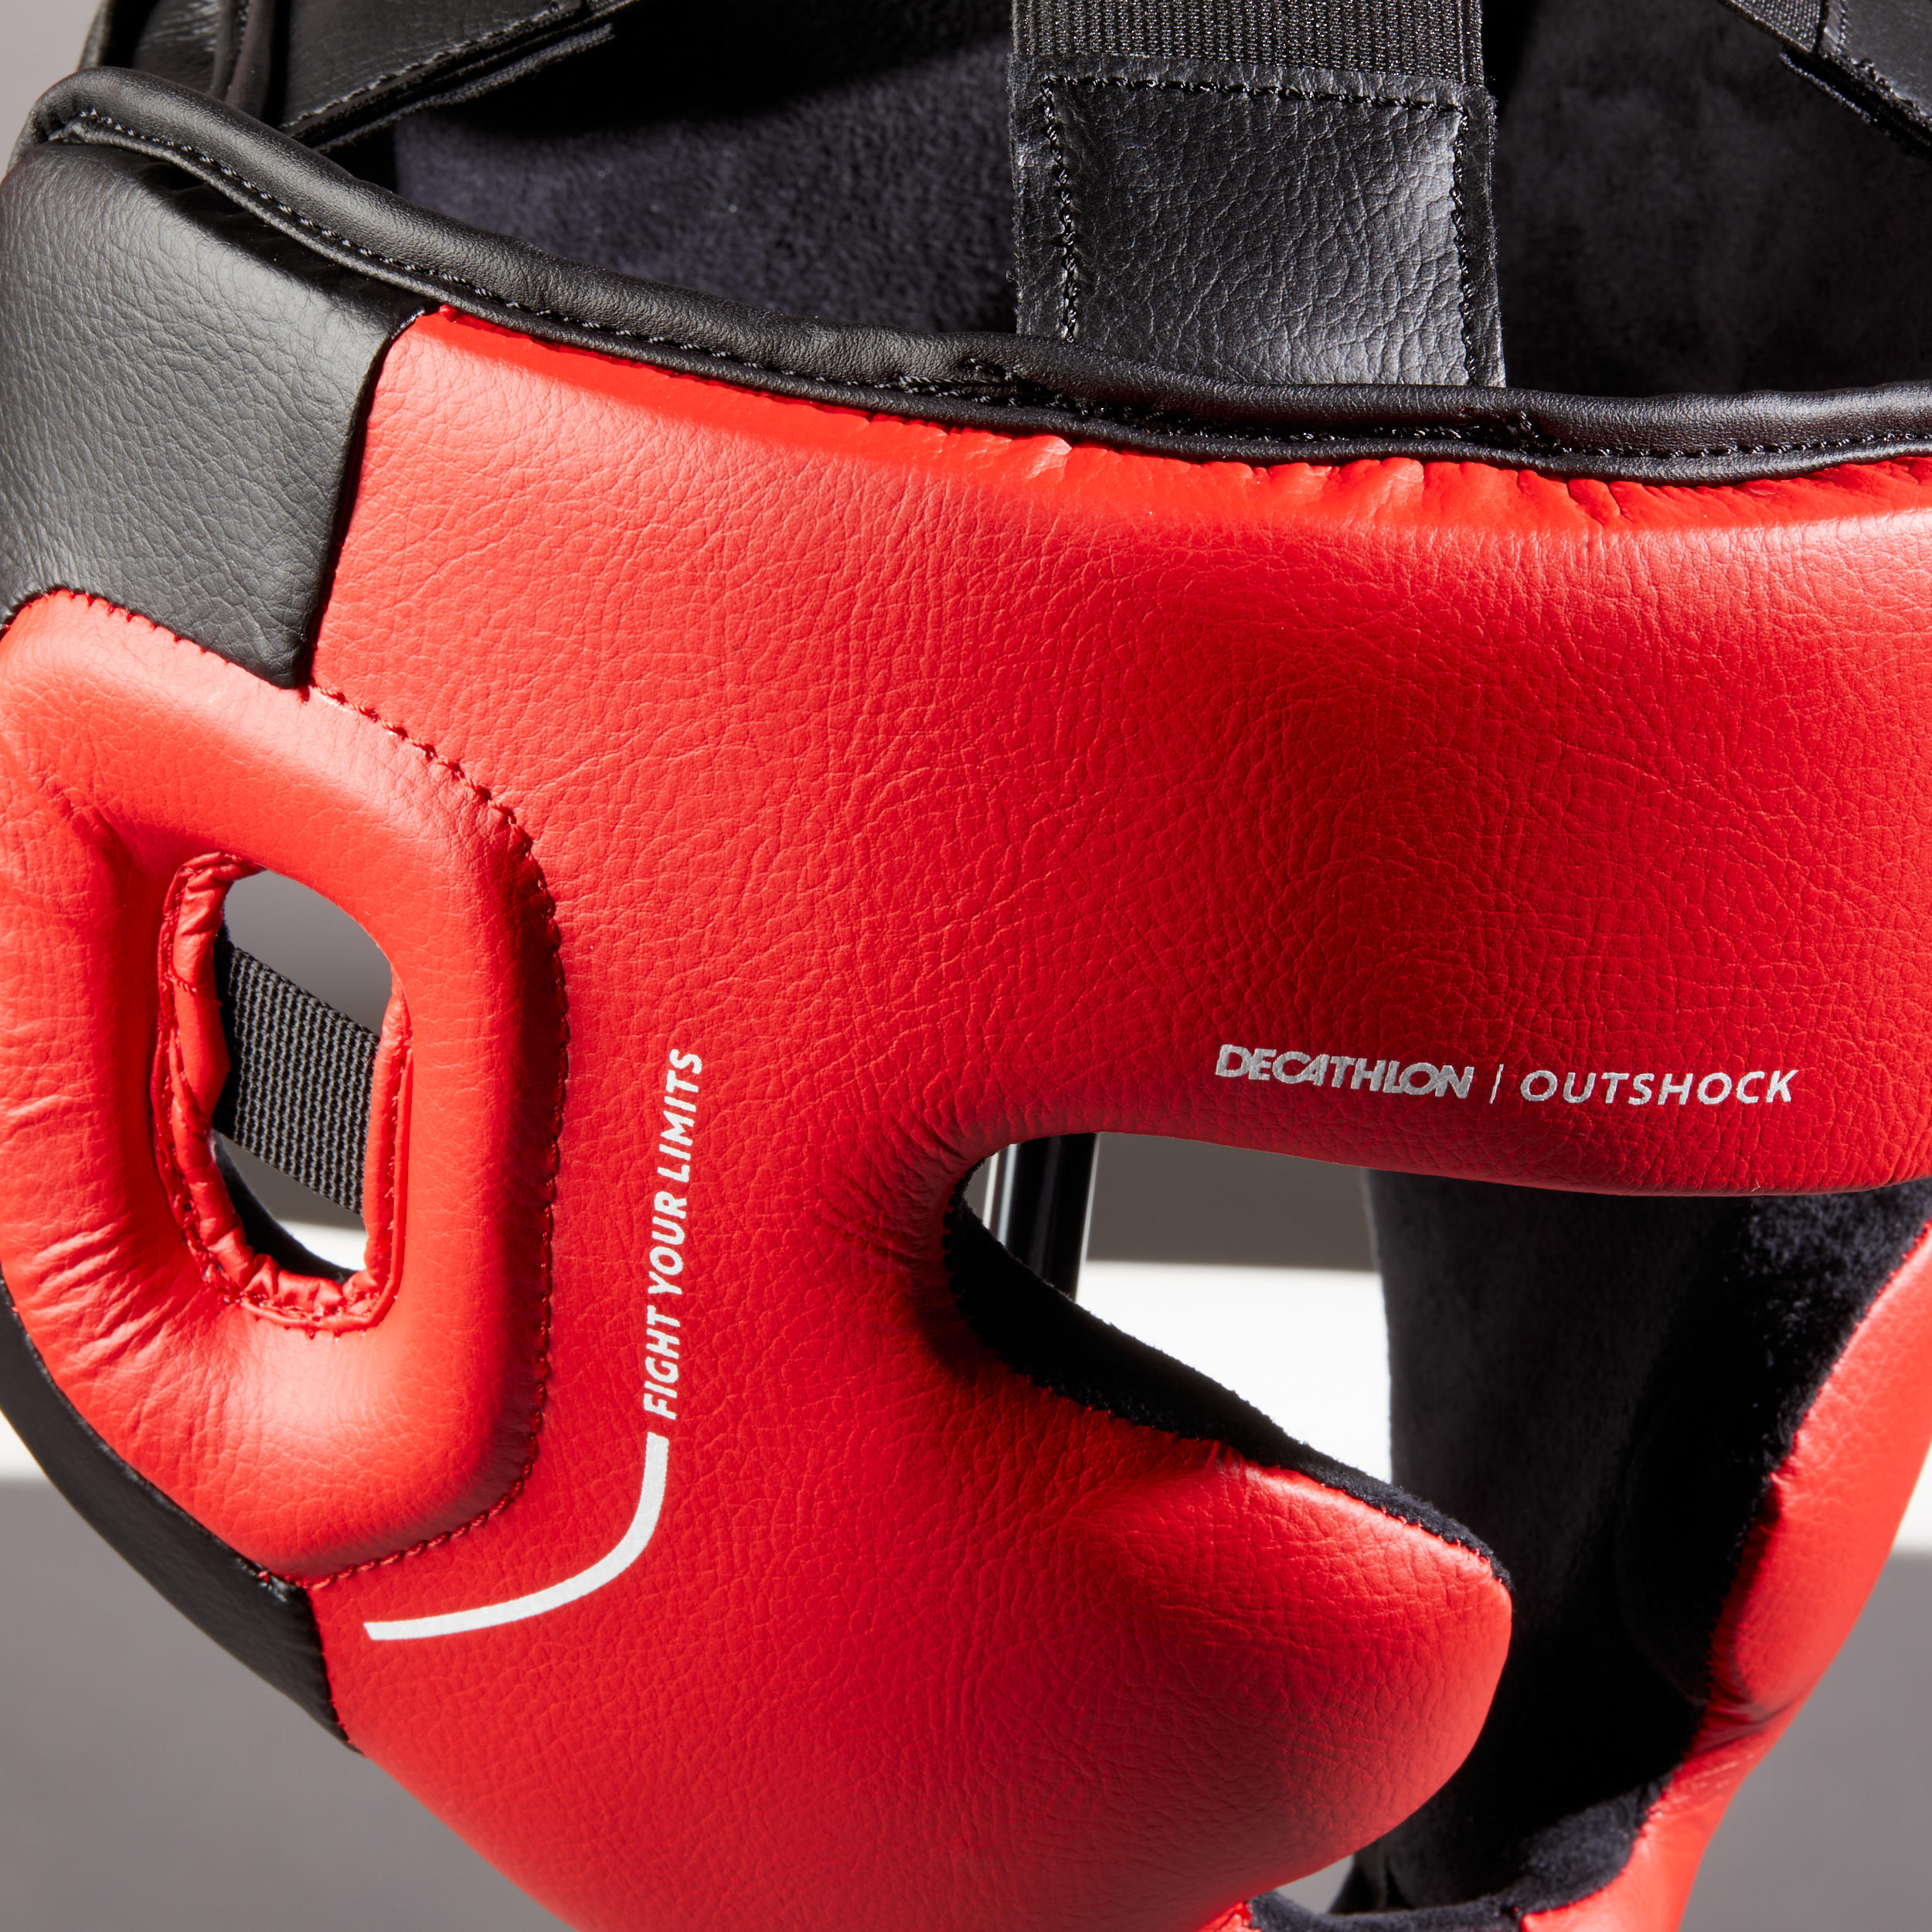 Kids' Boxing Full Face Headguard 500 - Red - OUTSHOCK